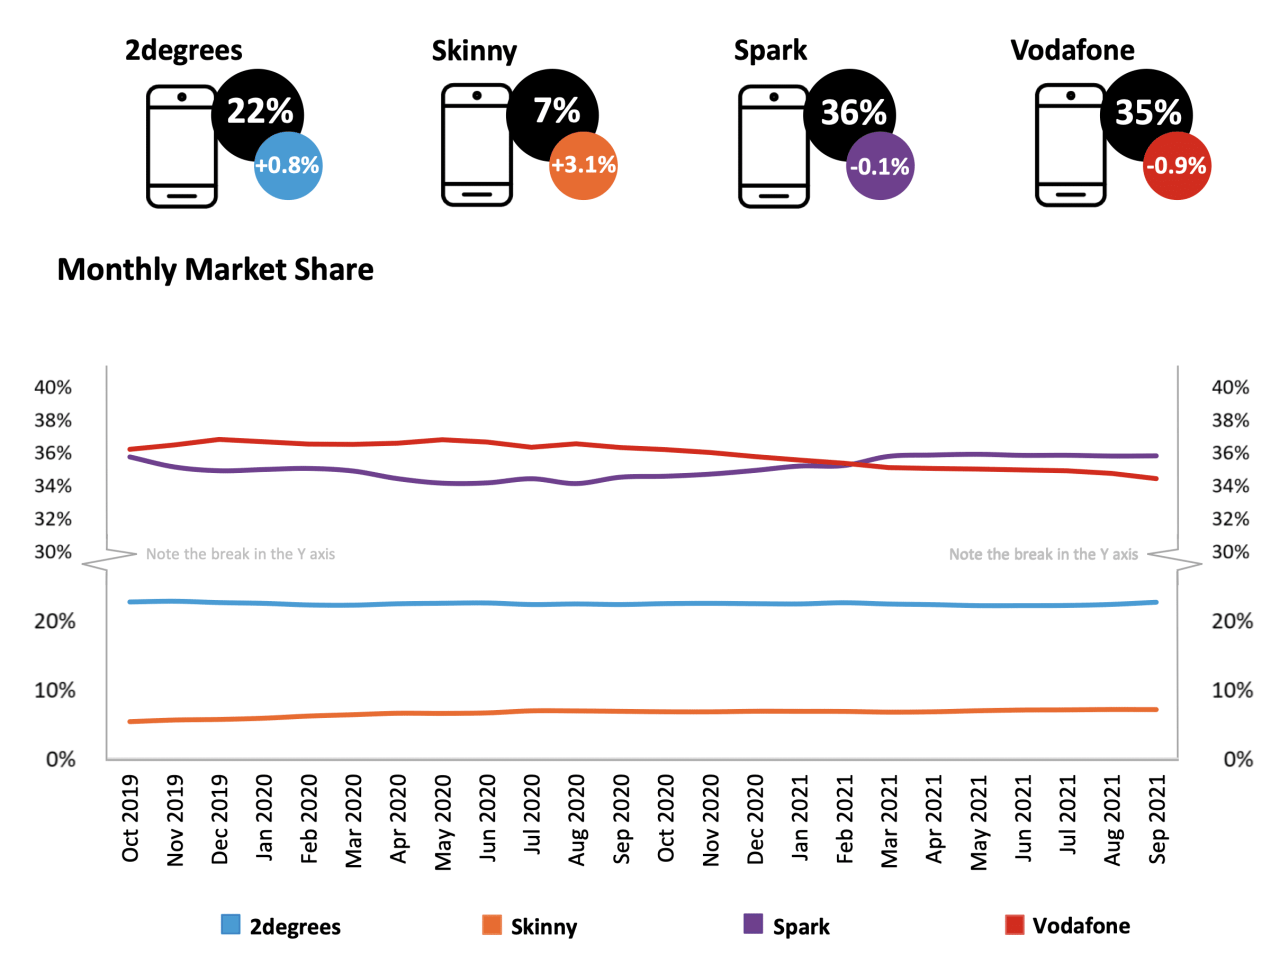 Telcowatch shows Spark ahead in mobile